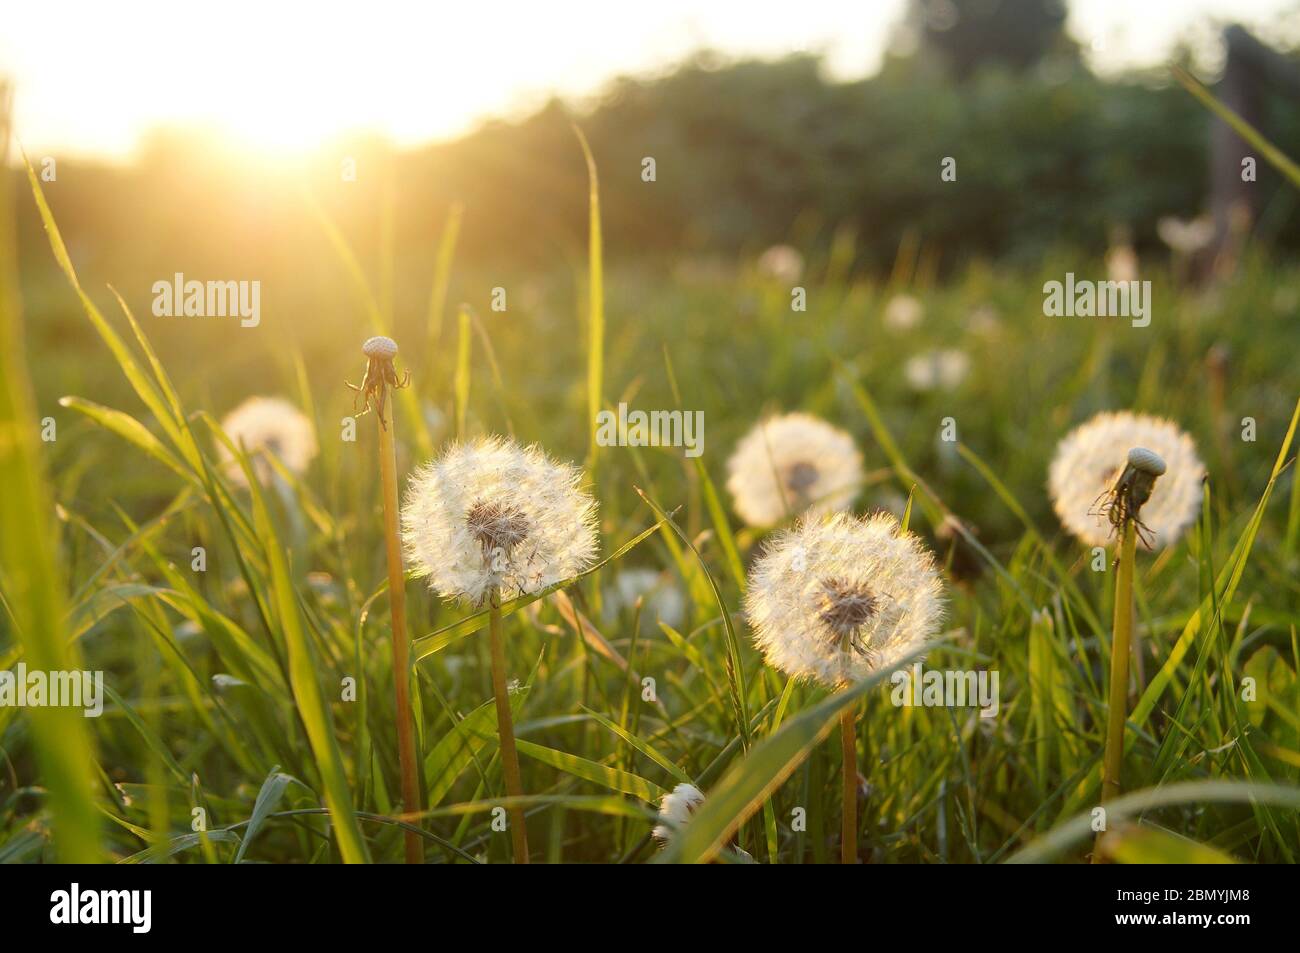 low angle view of white dandelion clocks ready to seed against the evening sun with lens flare Stock Photo